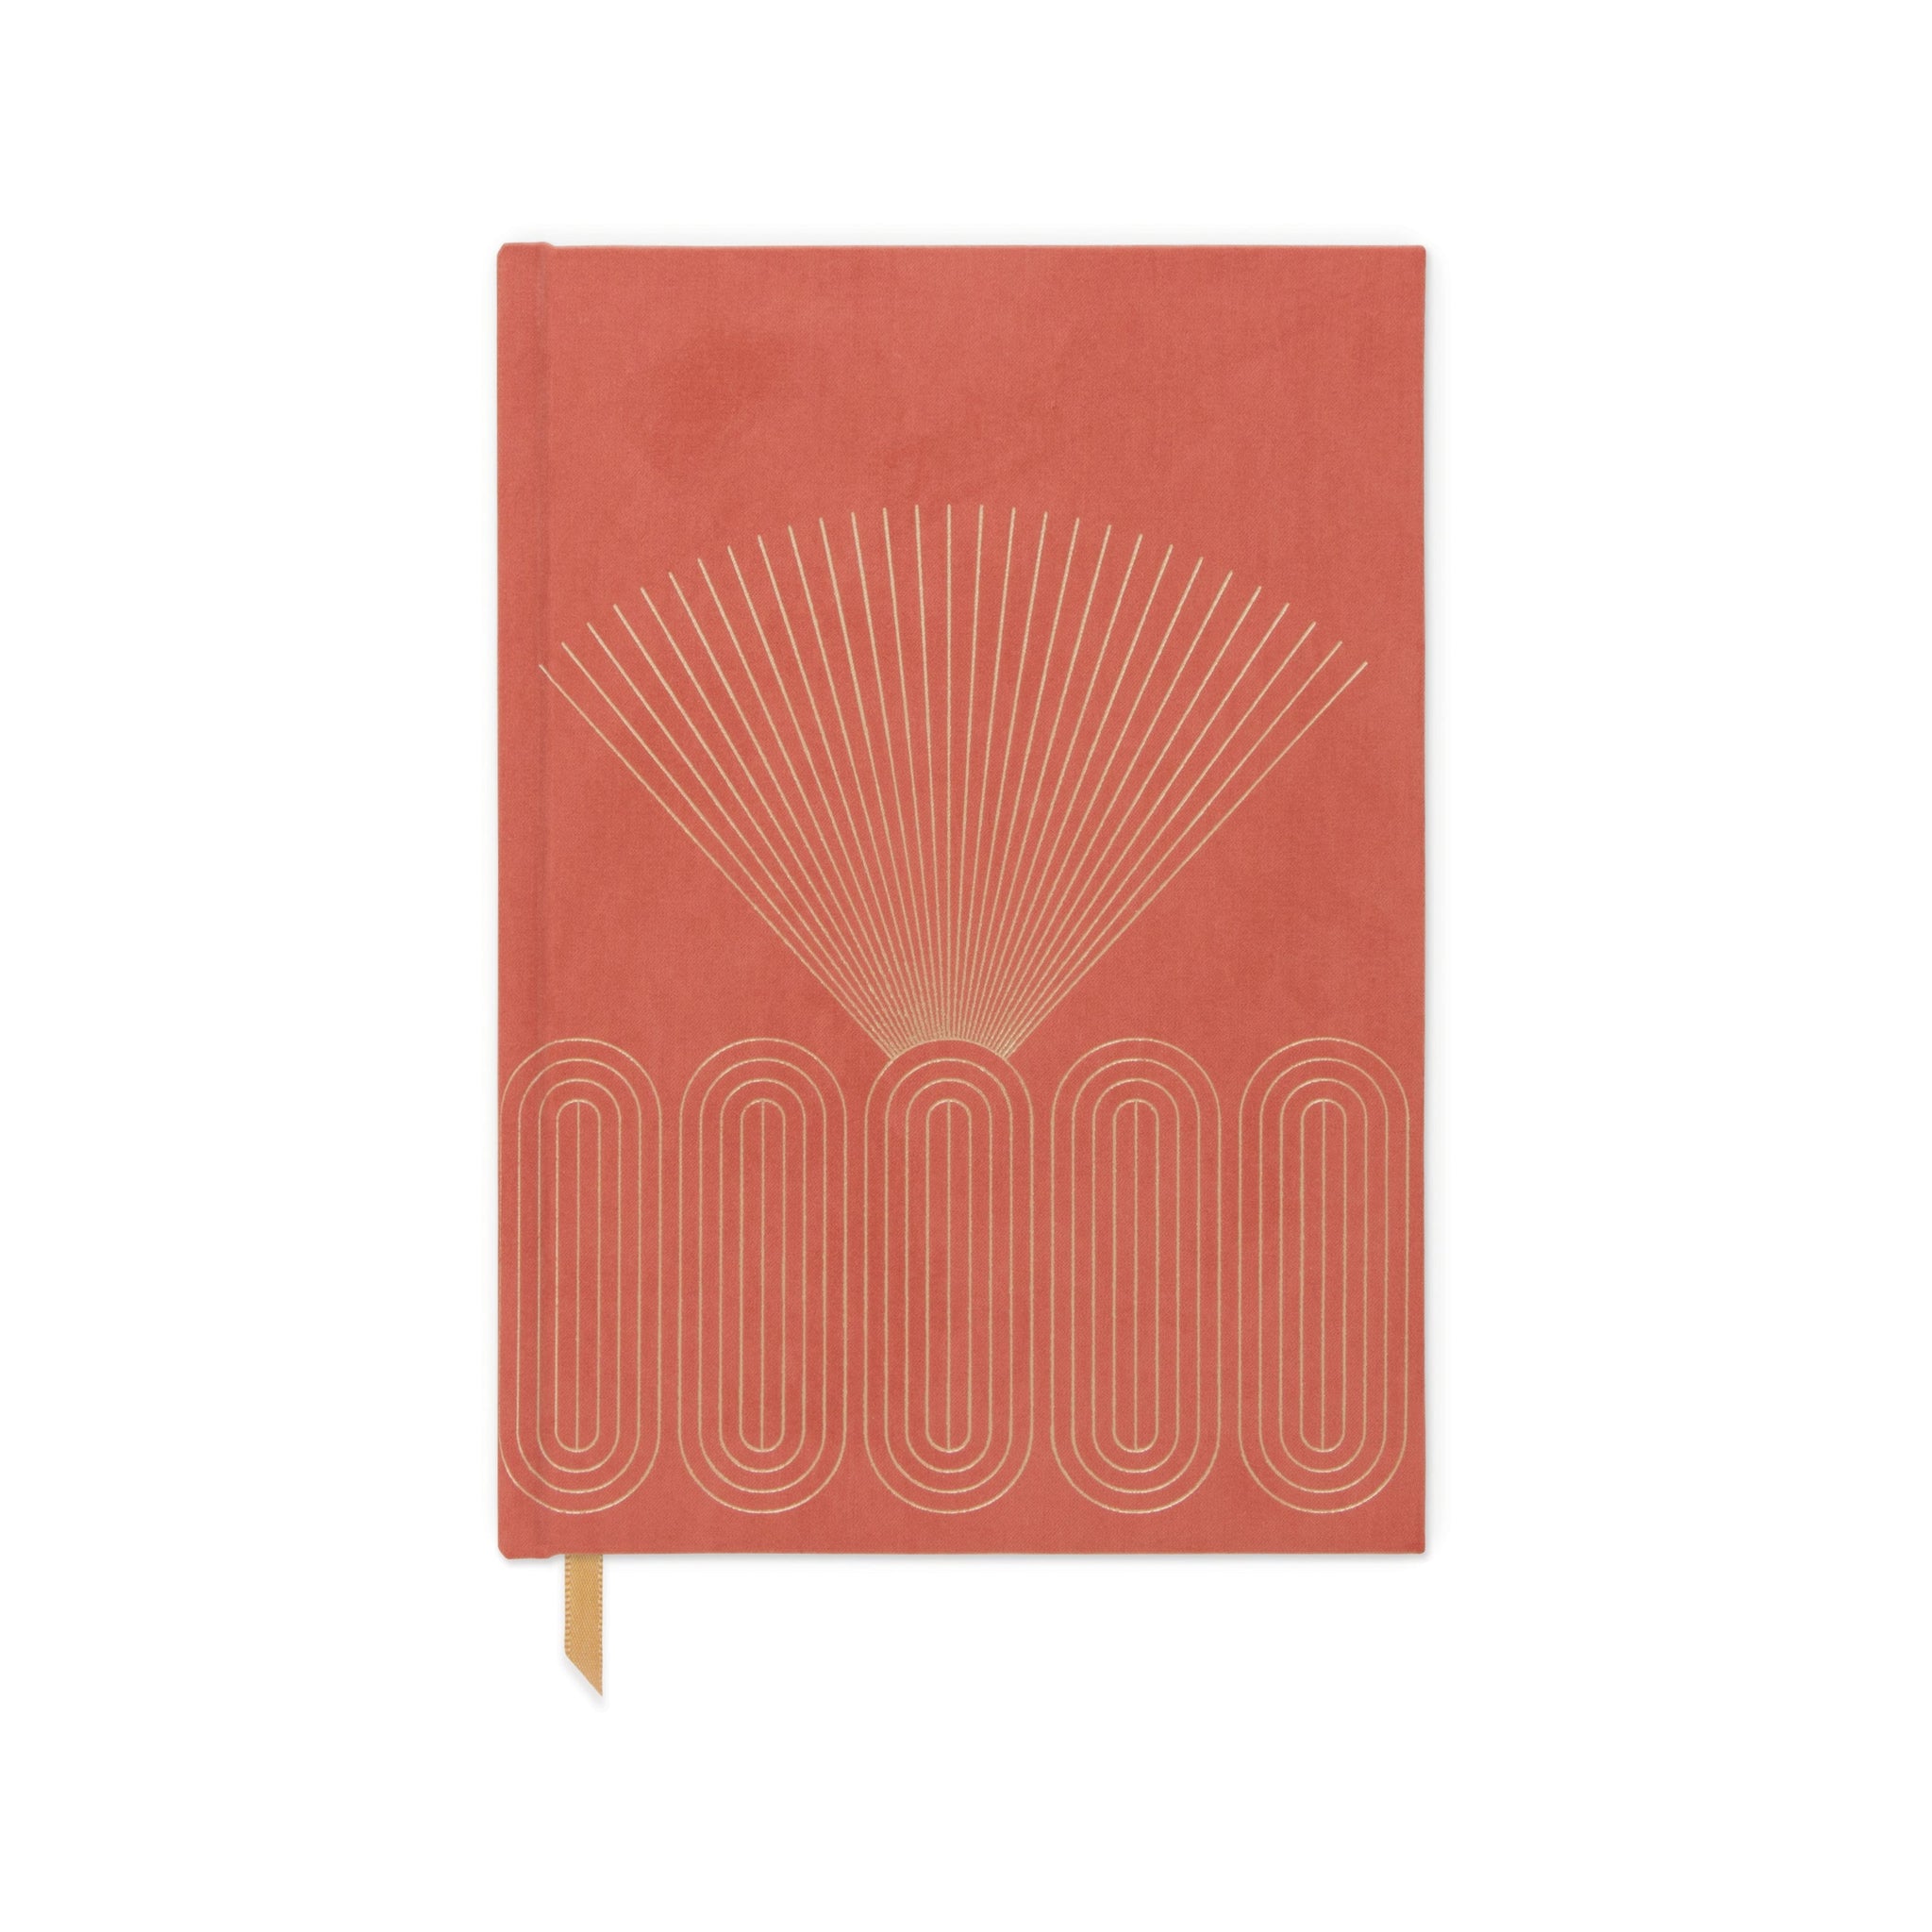 Hard Cover Suede Cloth Journal With Pocket | Radiant Rays